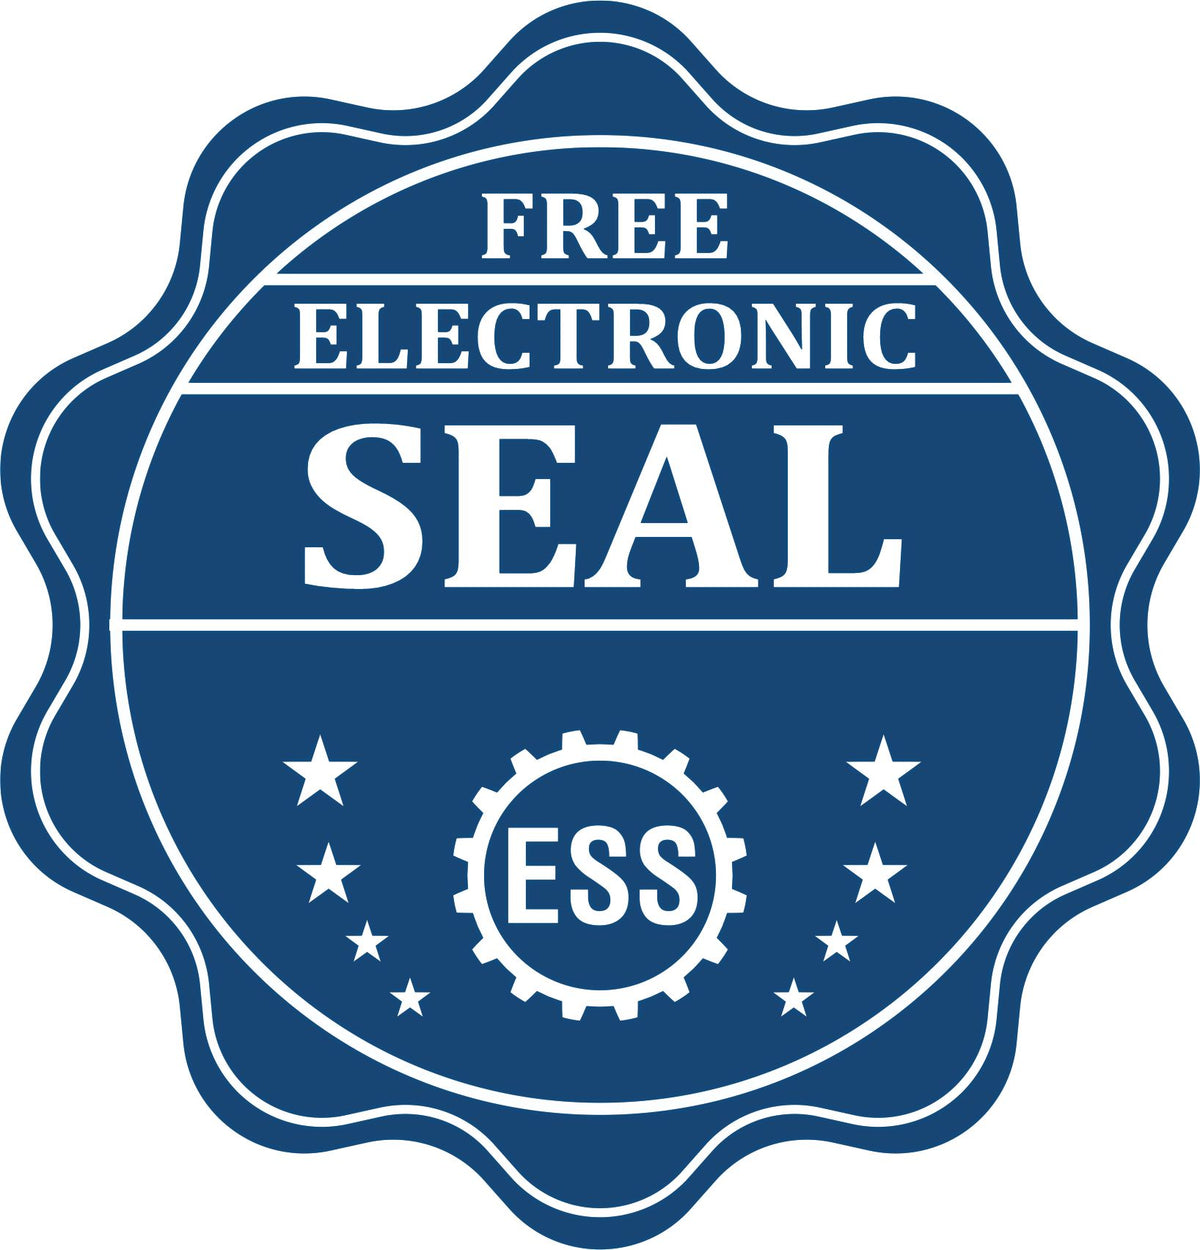 A badge showing a free electronic seal for the Wooden Handle Virginia State Seal Notary Public Stamp with stars and the ESS gear on the emblem.